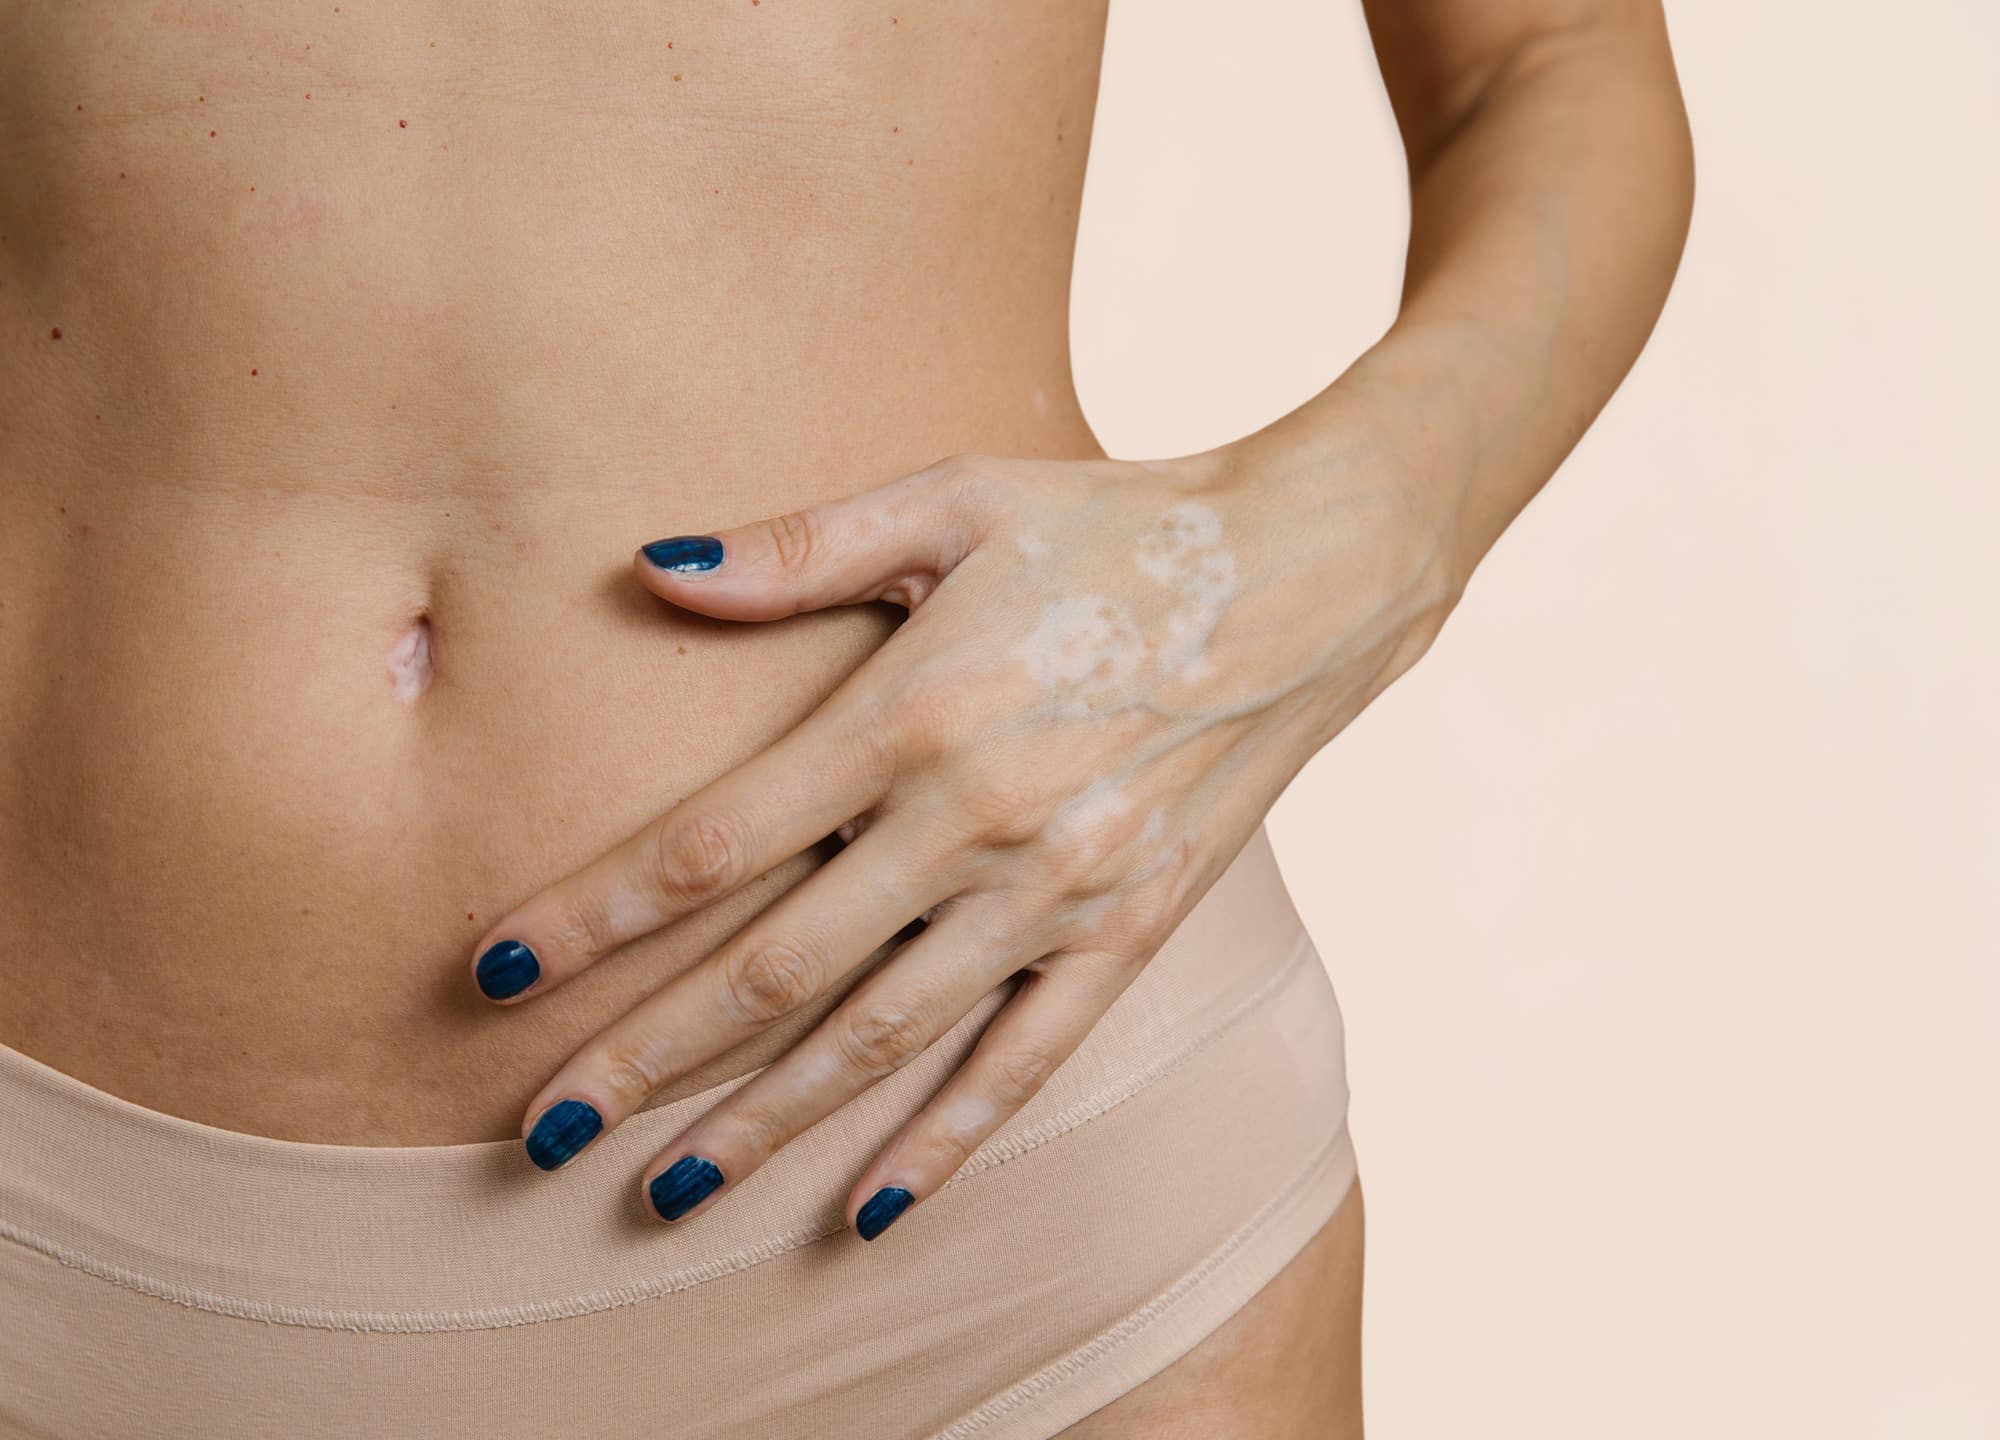 8 Things You Should Know About A Tummy Tuck—From Someone Who Got One